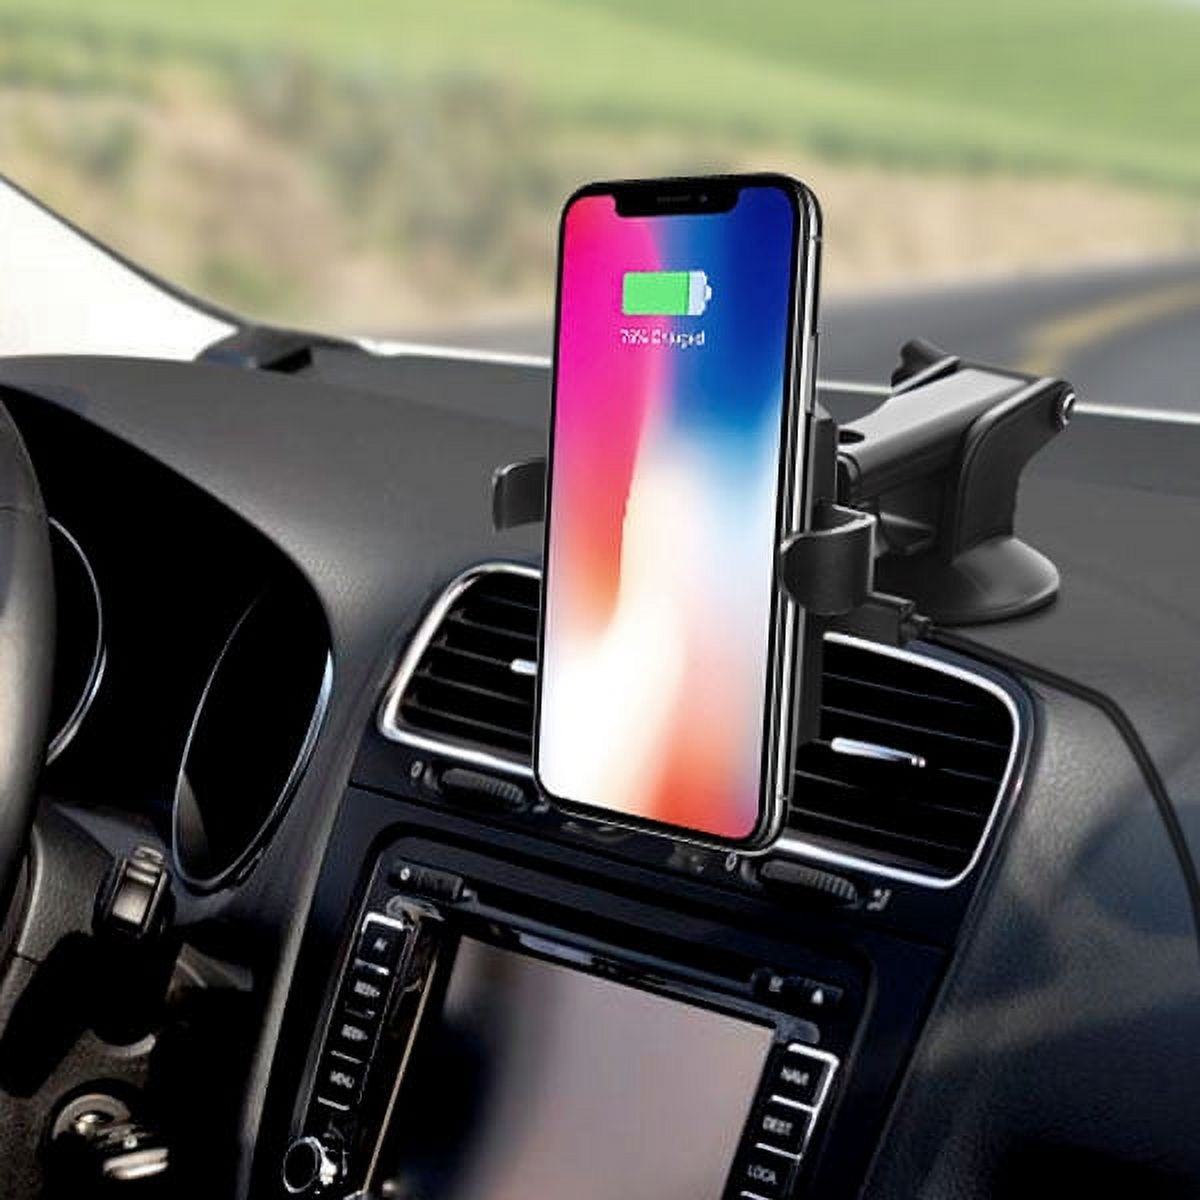 2-in-1 Wireless Charger and Suction Base Phone Mount for iPhone 12 Pro Max, 12, 12 Mini, 12 Pro, SE (2020), 11 Pro Max, 11 Pro, iPhone 11, Xs Max, Xs, Xs Plus, XR, X, 8, 8 Plus (Black) - image 3 of 7